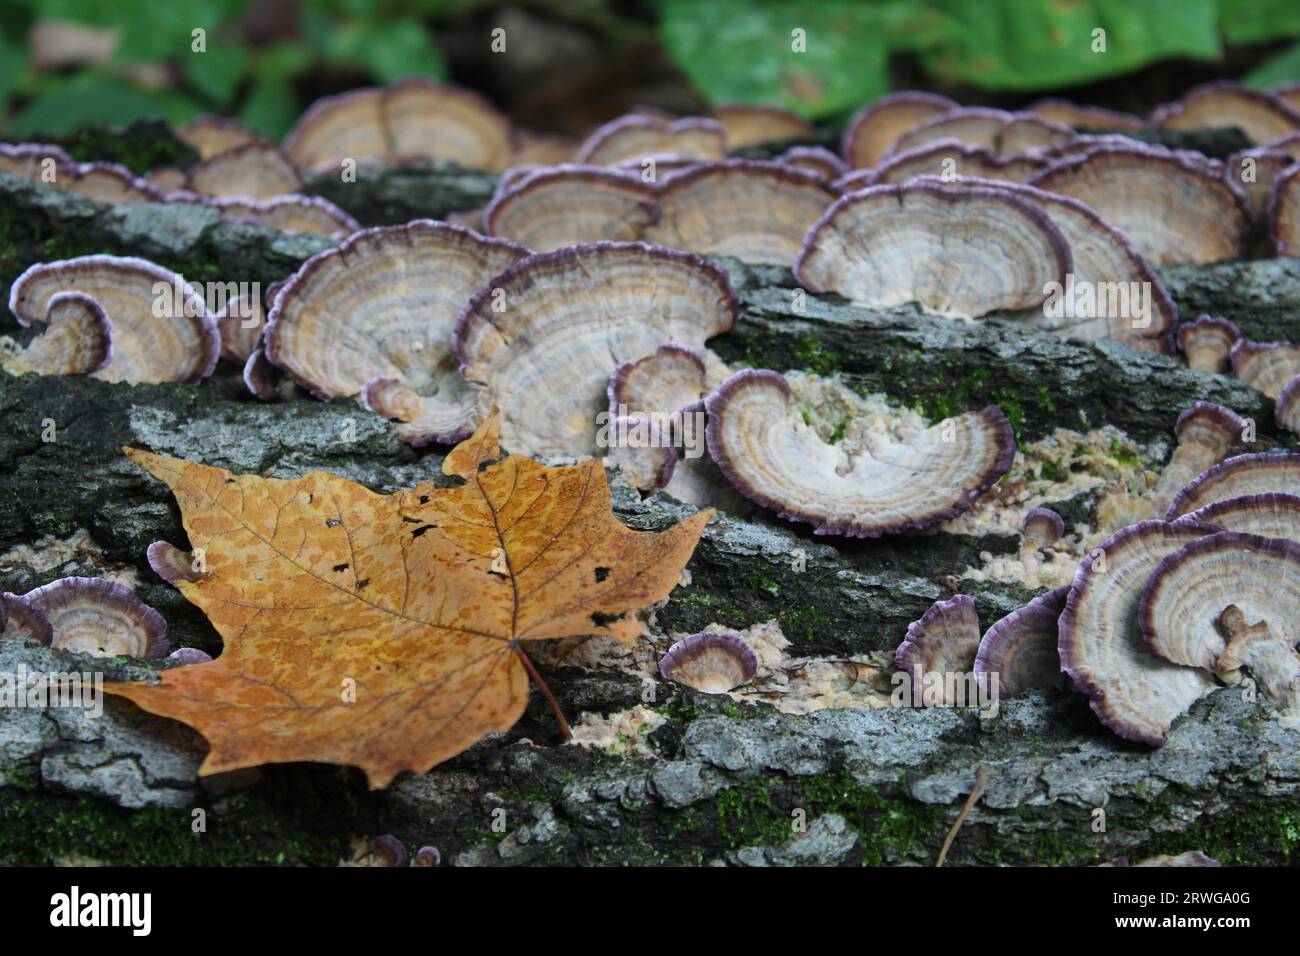 Orange maple leaf on a log with violet-toothed polypore mushrooms in the background at Camp Ground Road Woods in Des Plaines, Illinois Stock Photo